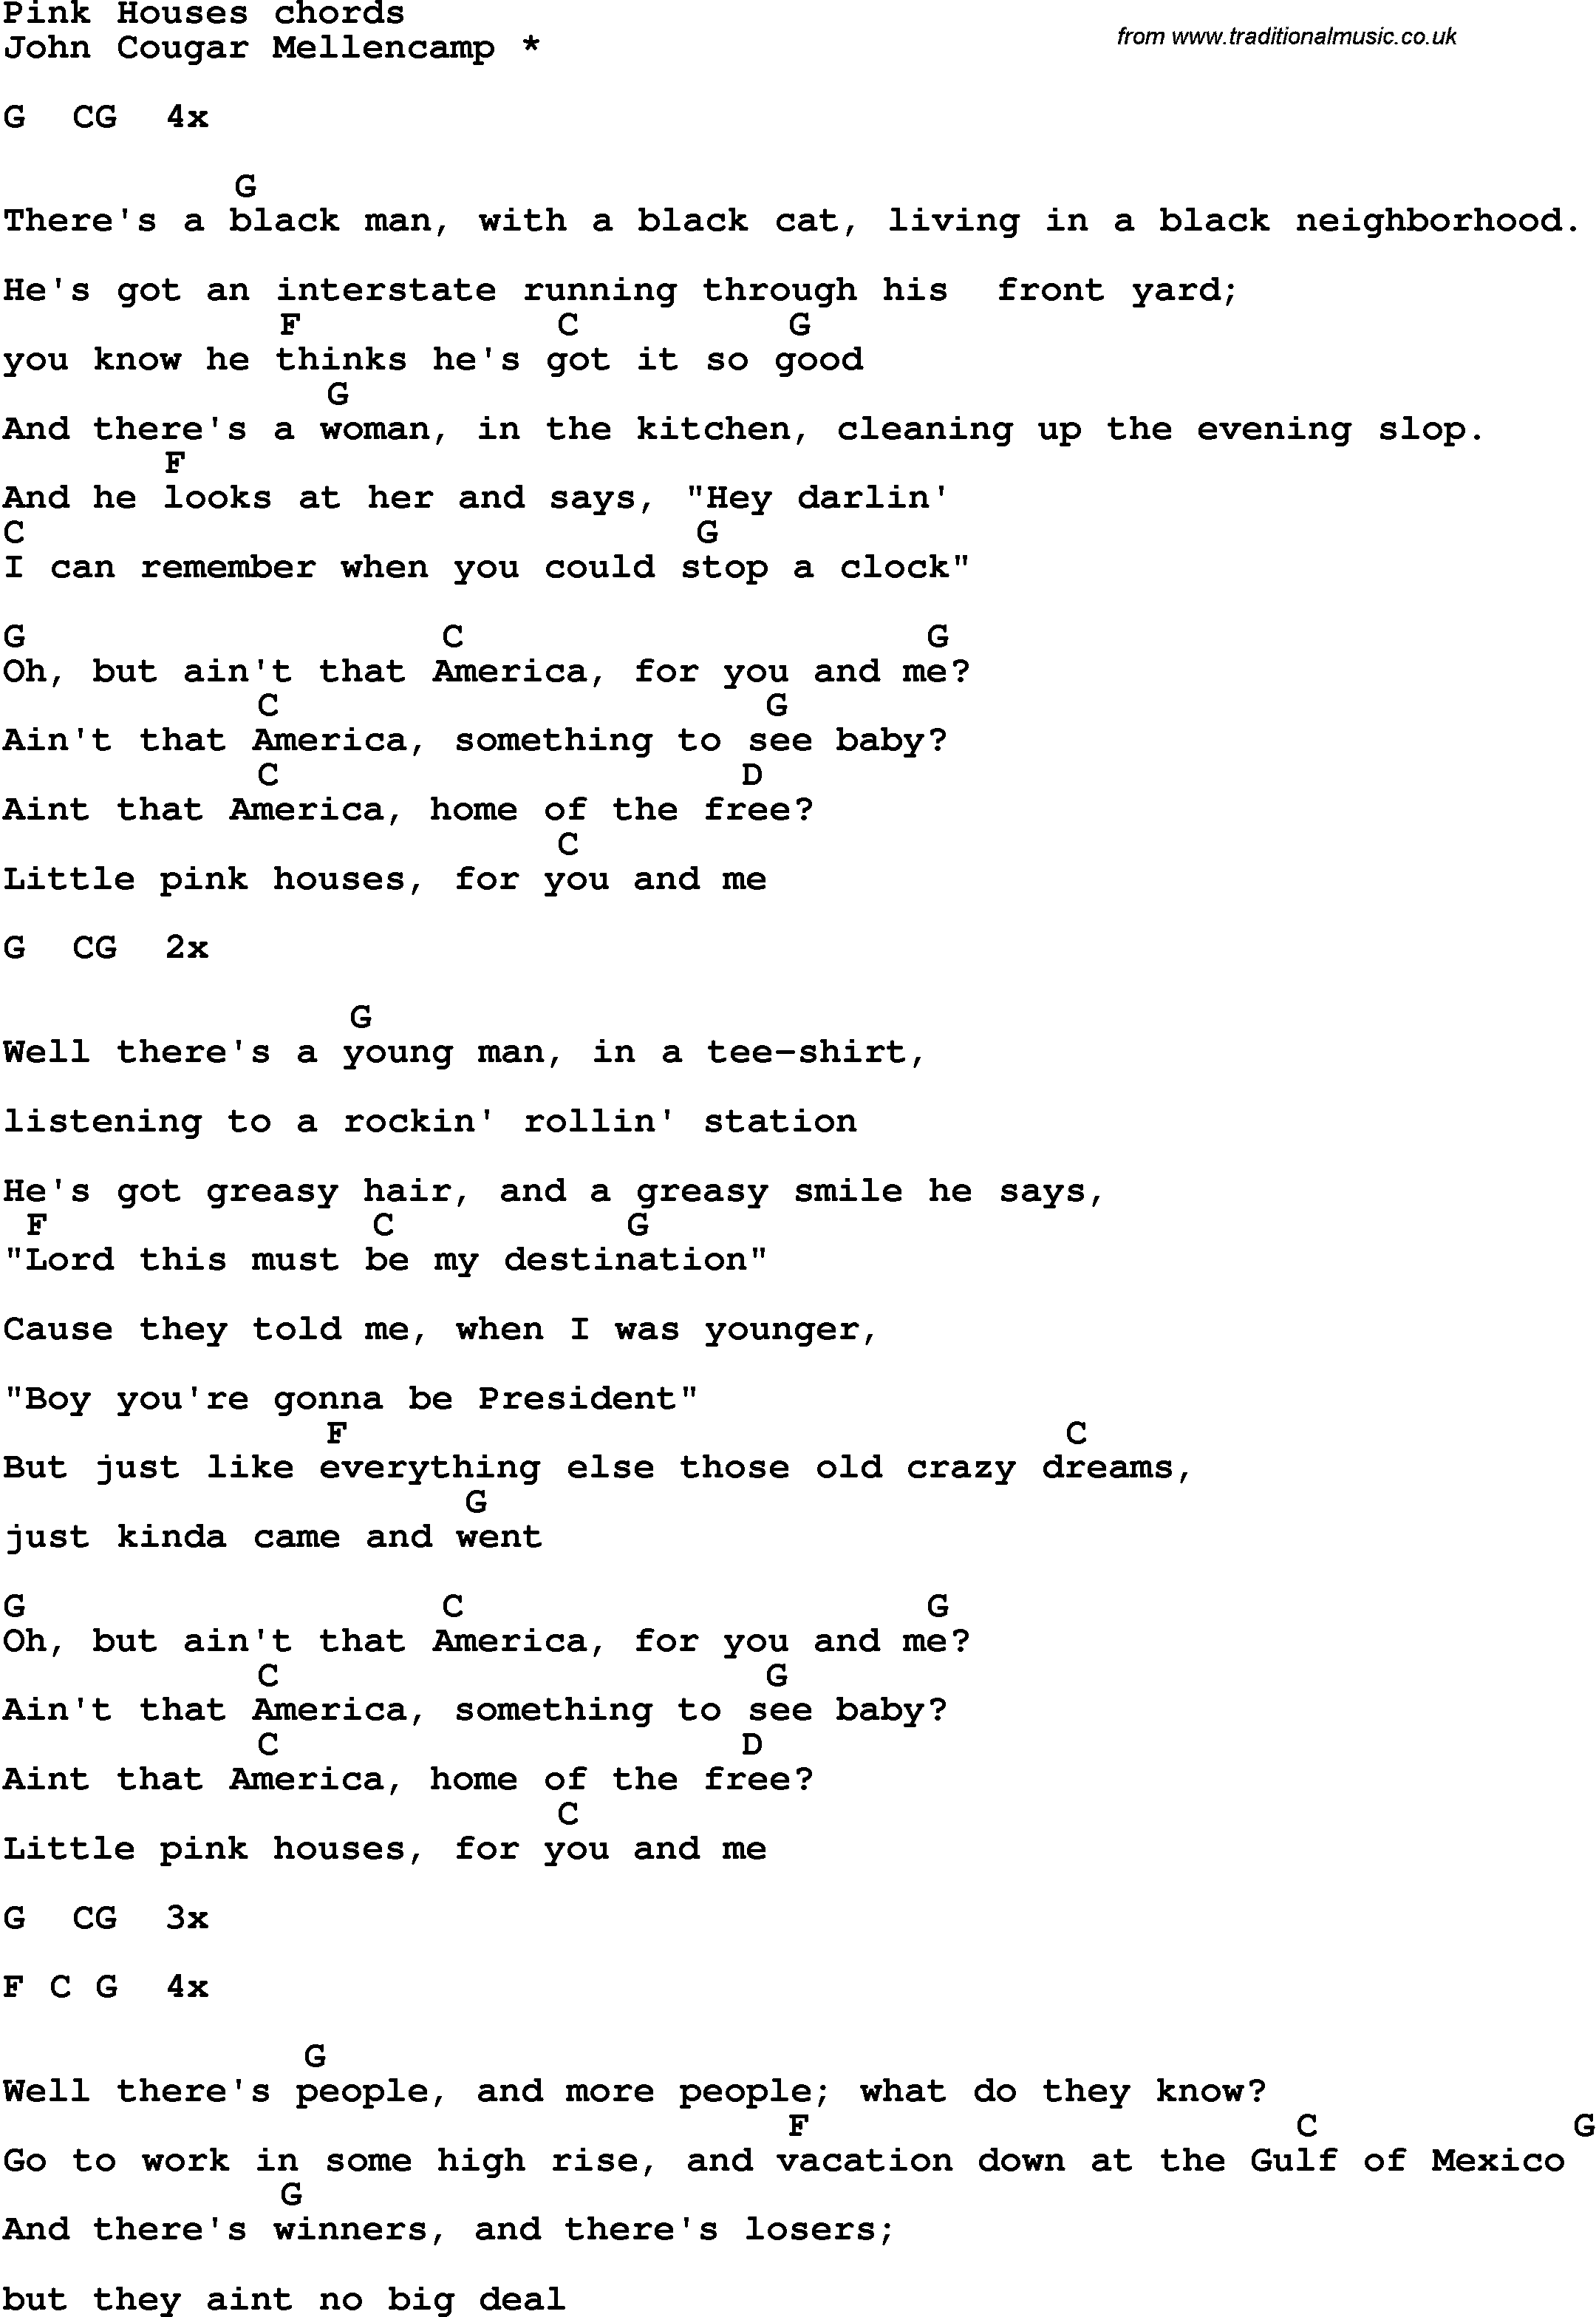 Song Lyrics with guitar chords for Pink Houses